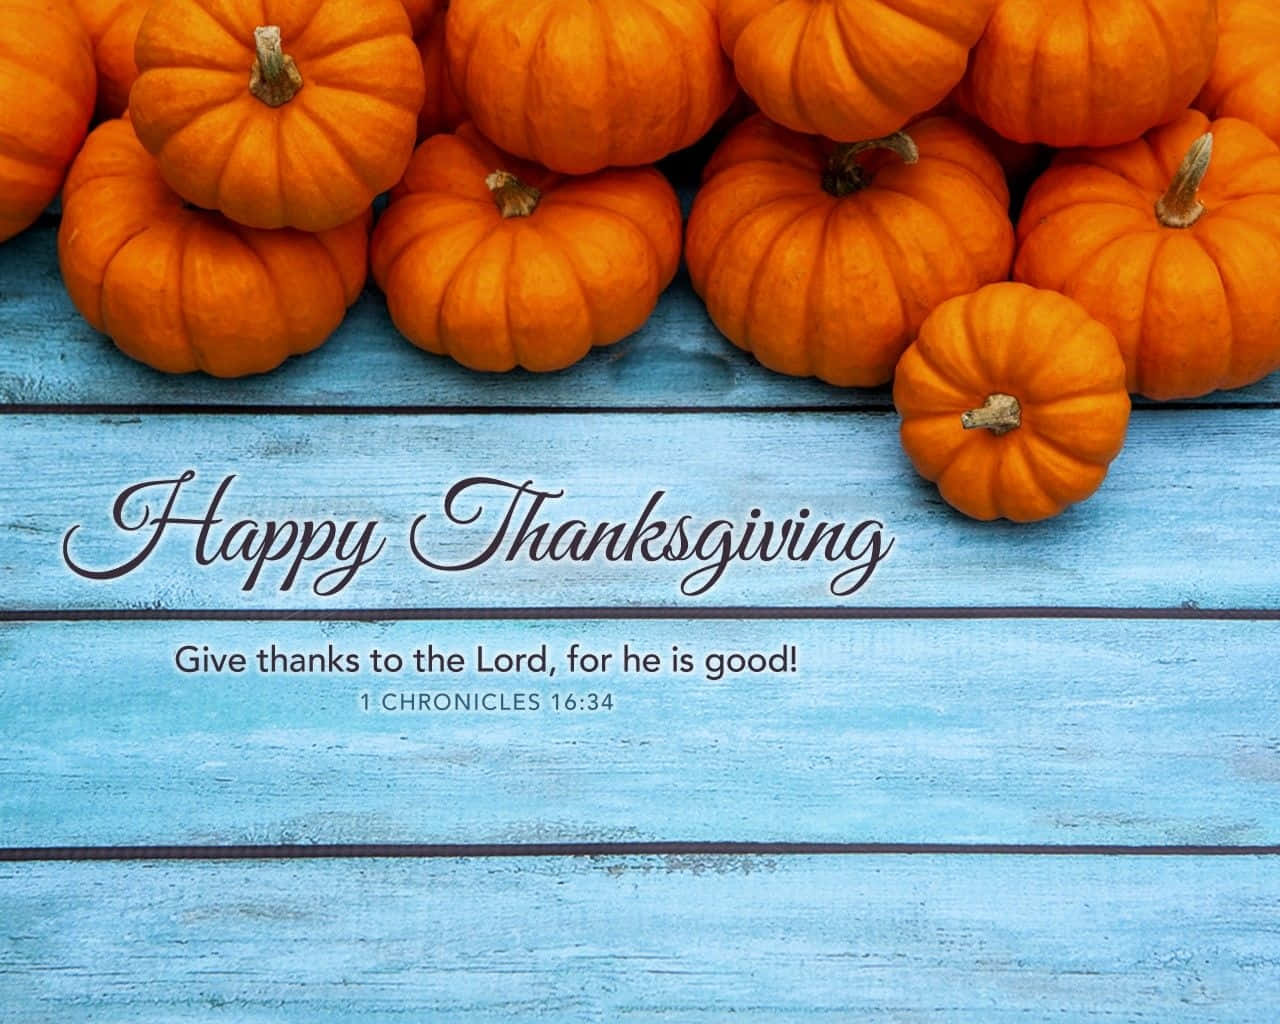 Feel The Spirit Of Thanksgiving With This Beautiful Image! Background